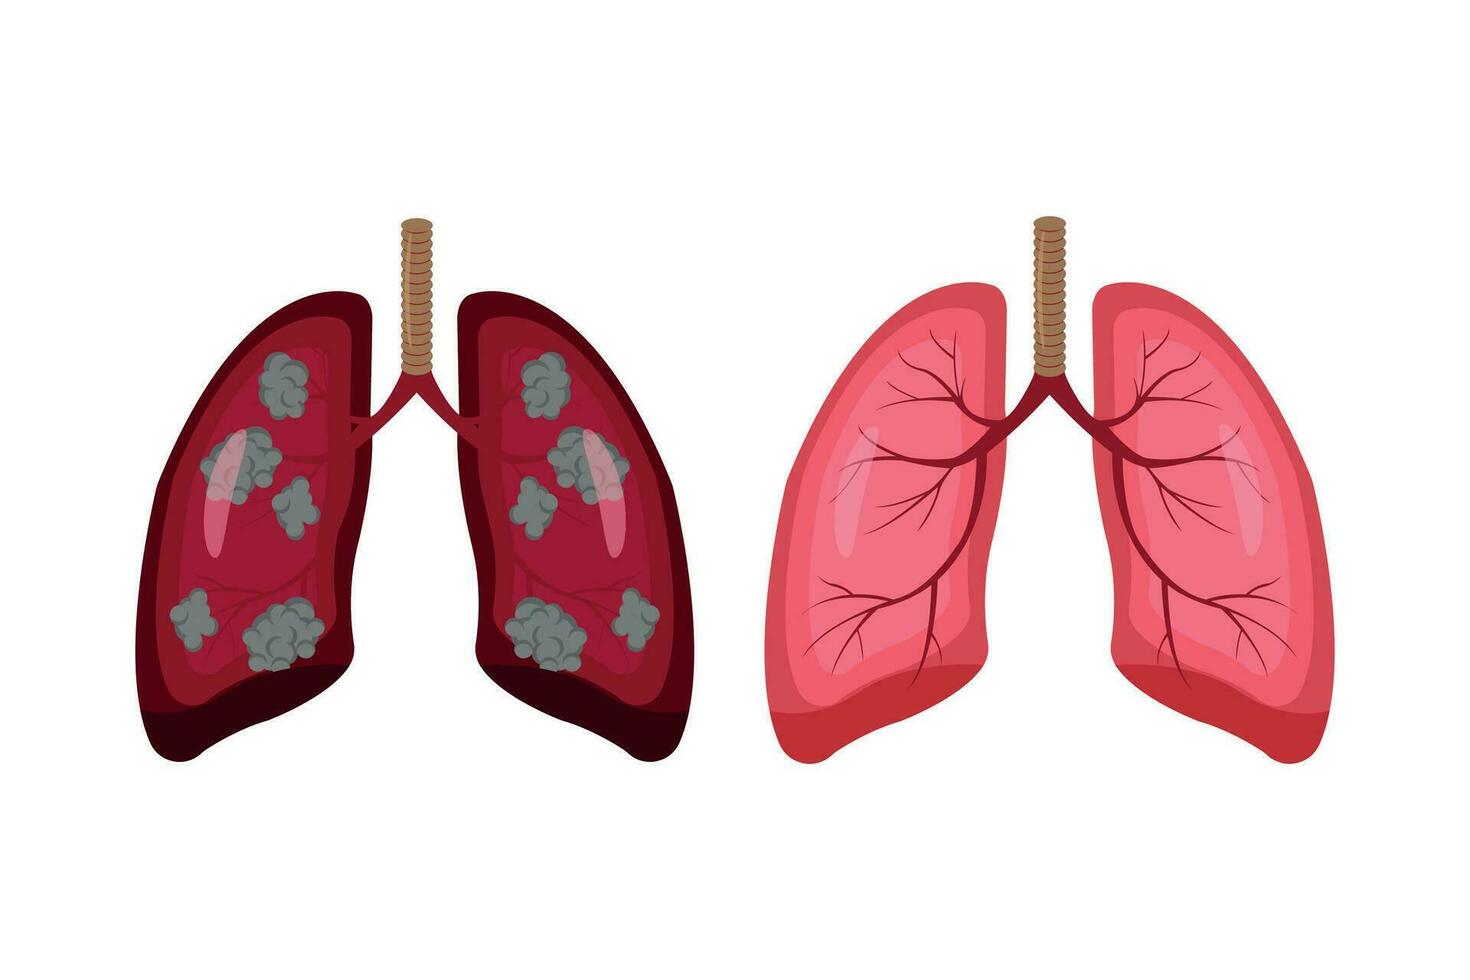 lung cancer and normal lung illustration comparation. eps 10. icon set vector